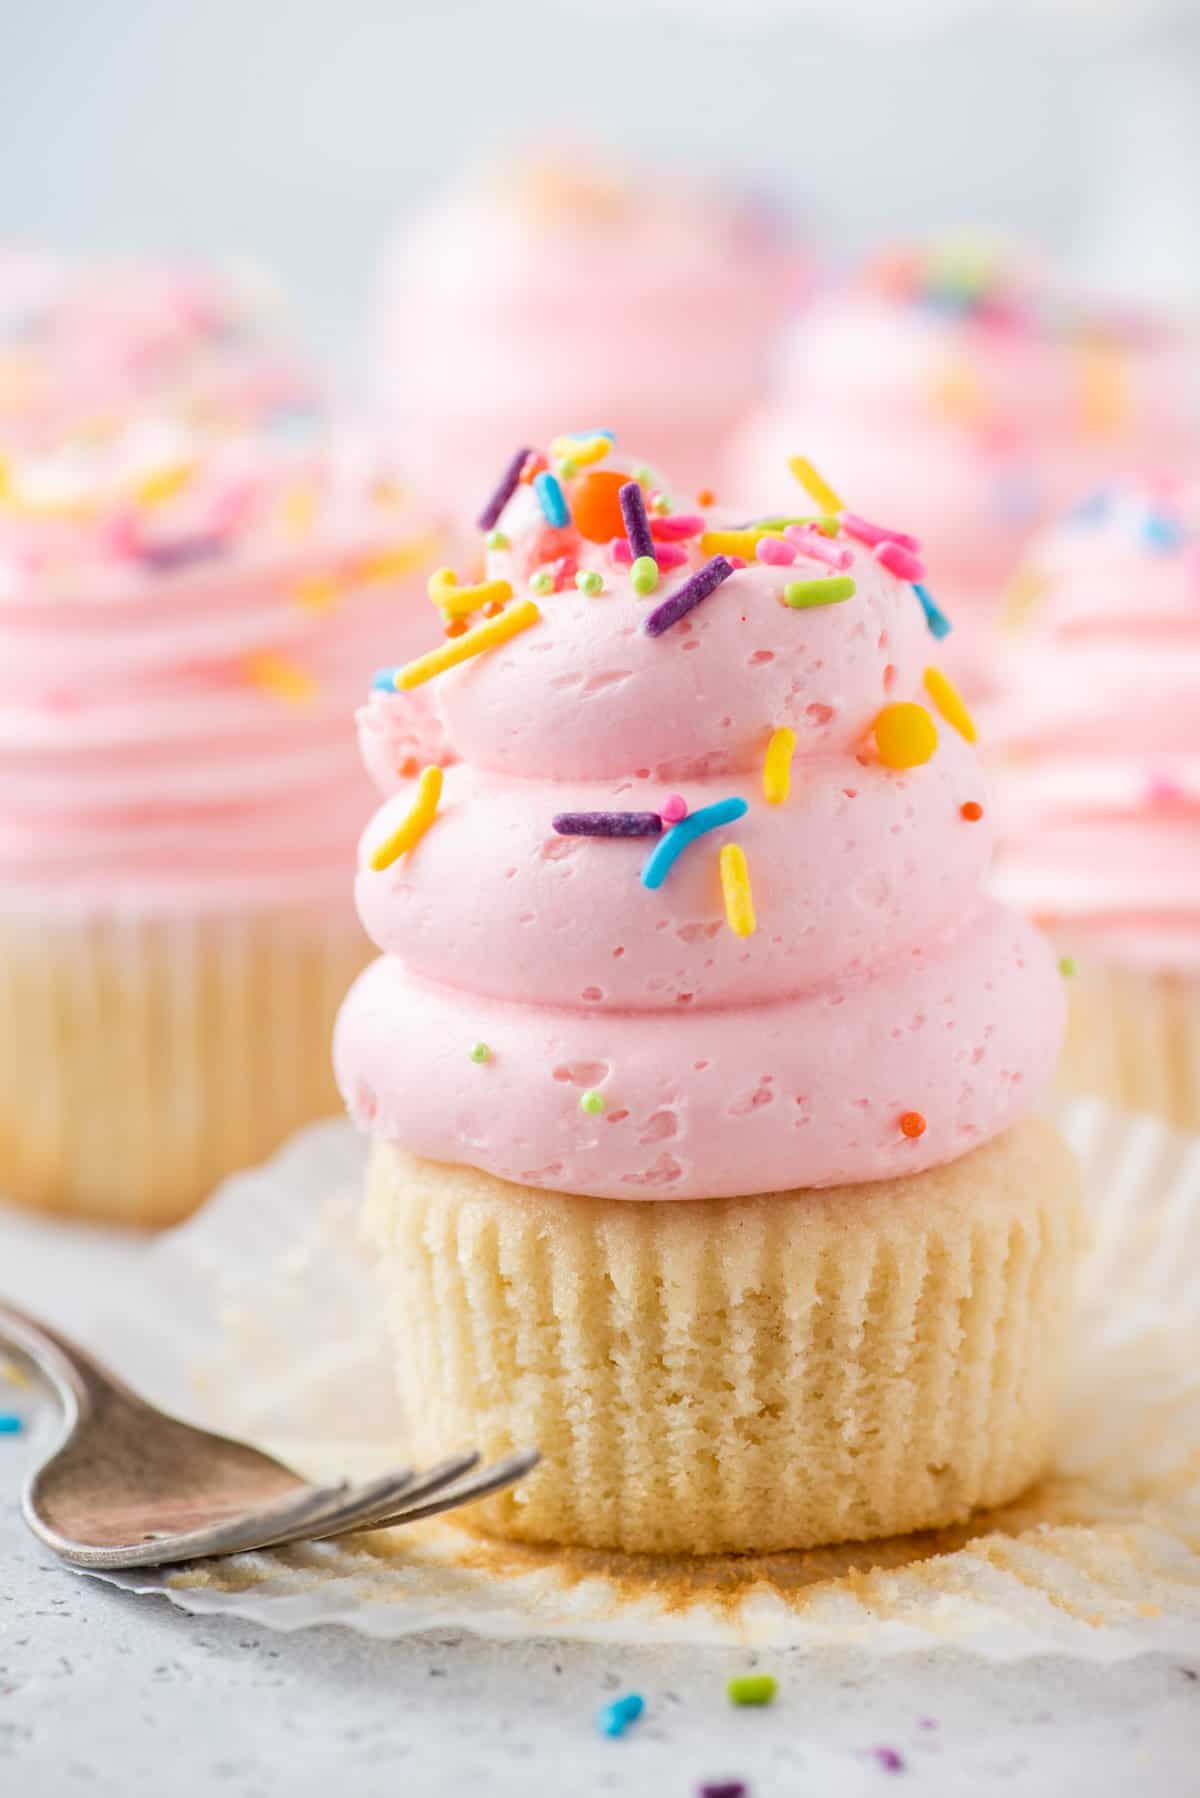 Gluten-free cupcake topped with pink vanilla buttercream and sprinkles